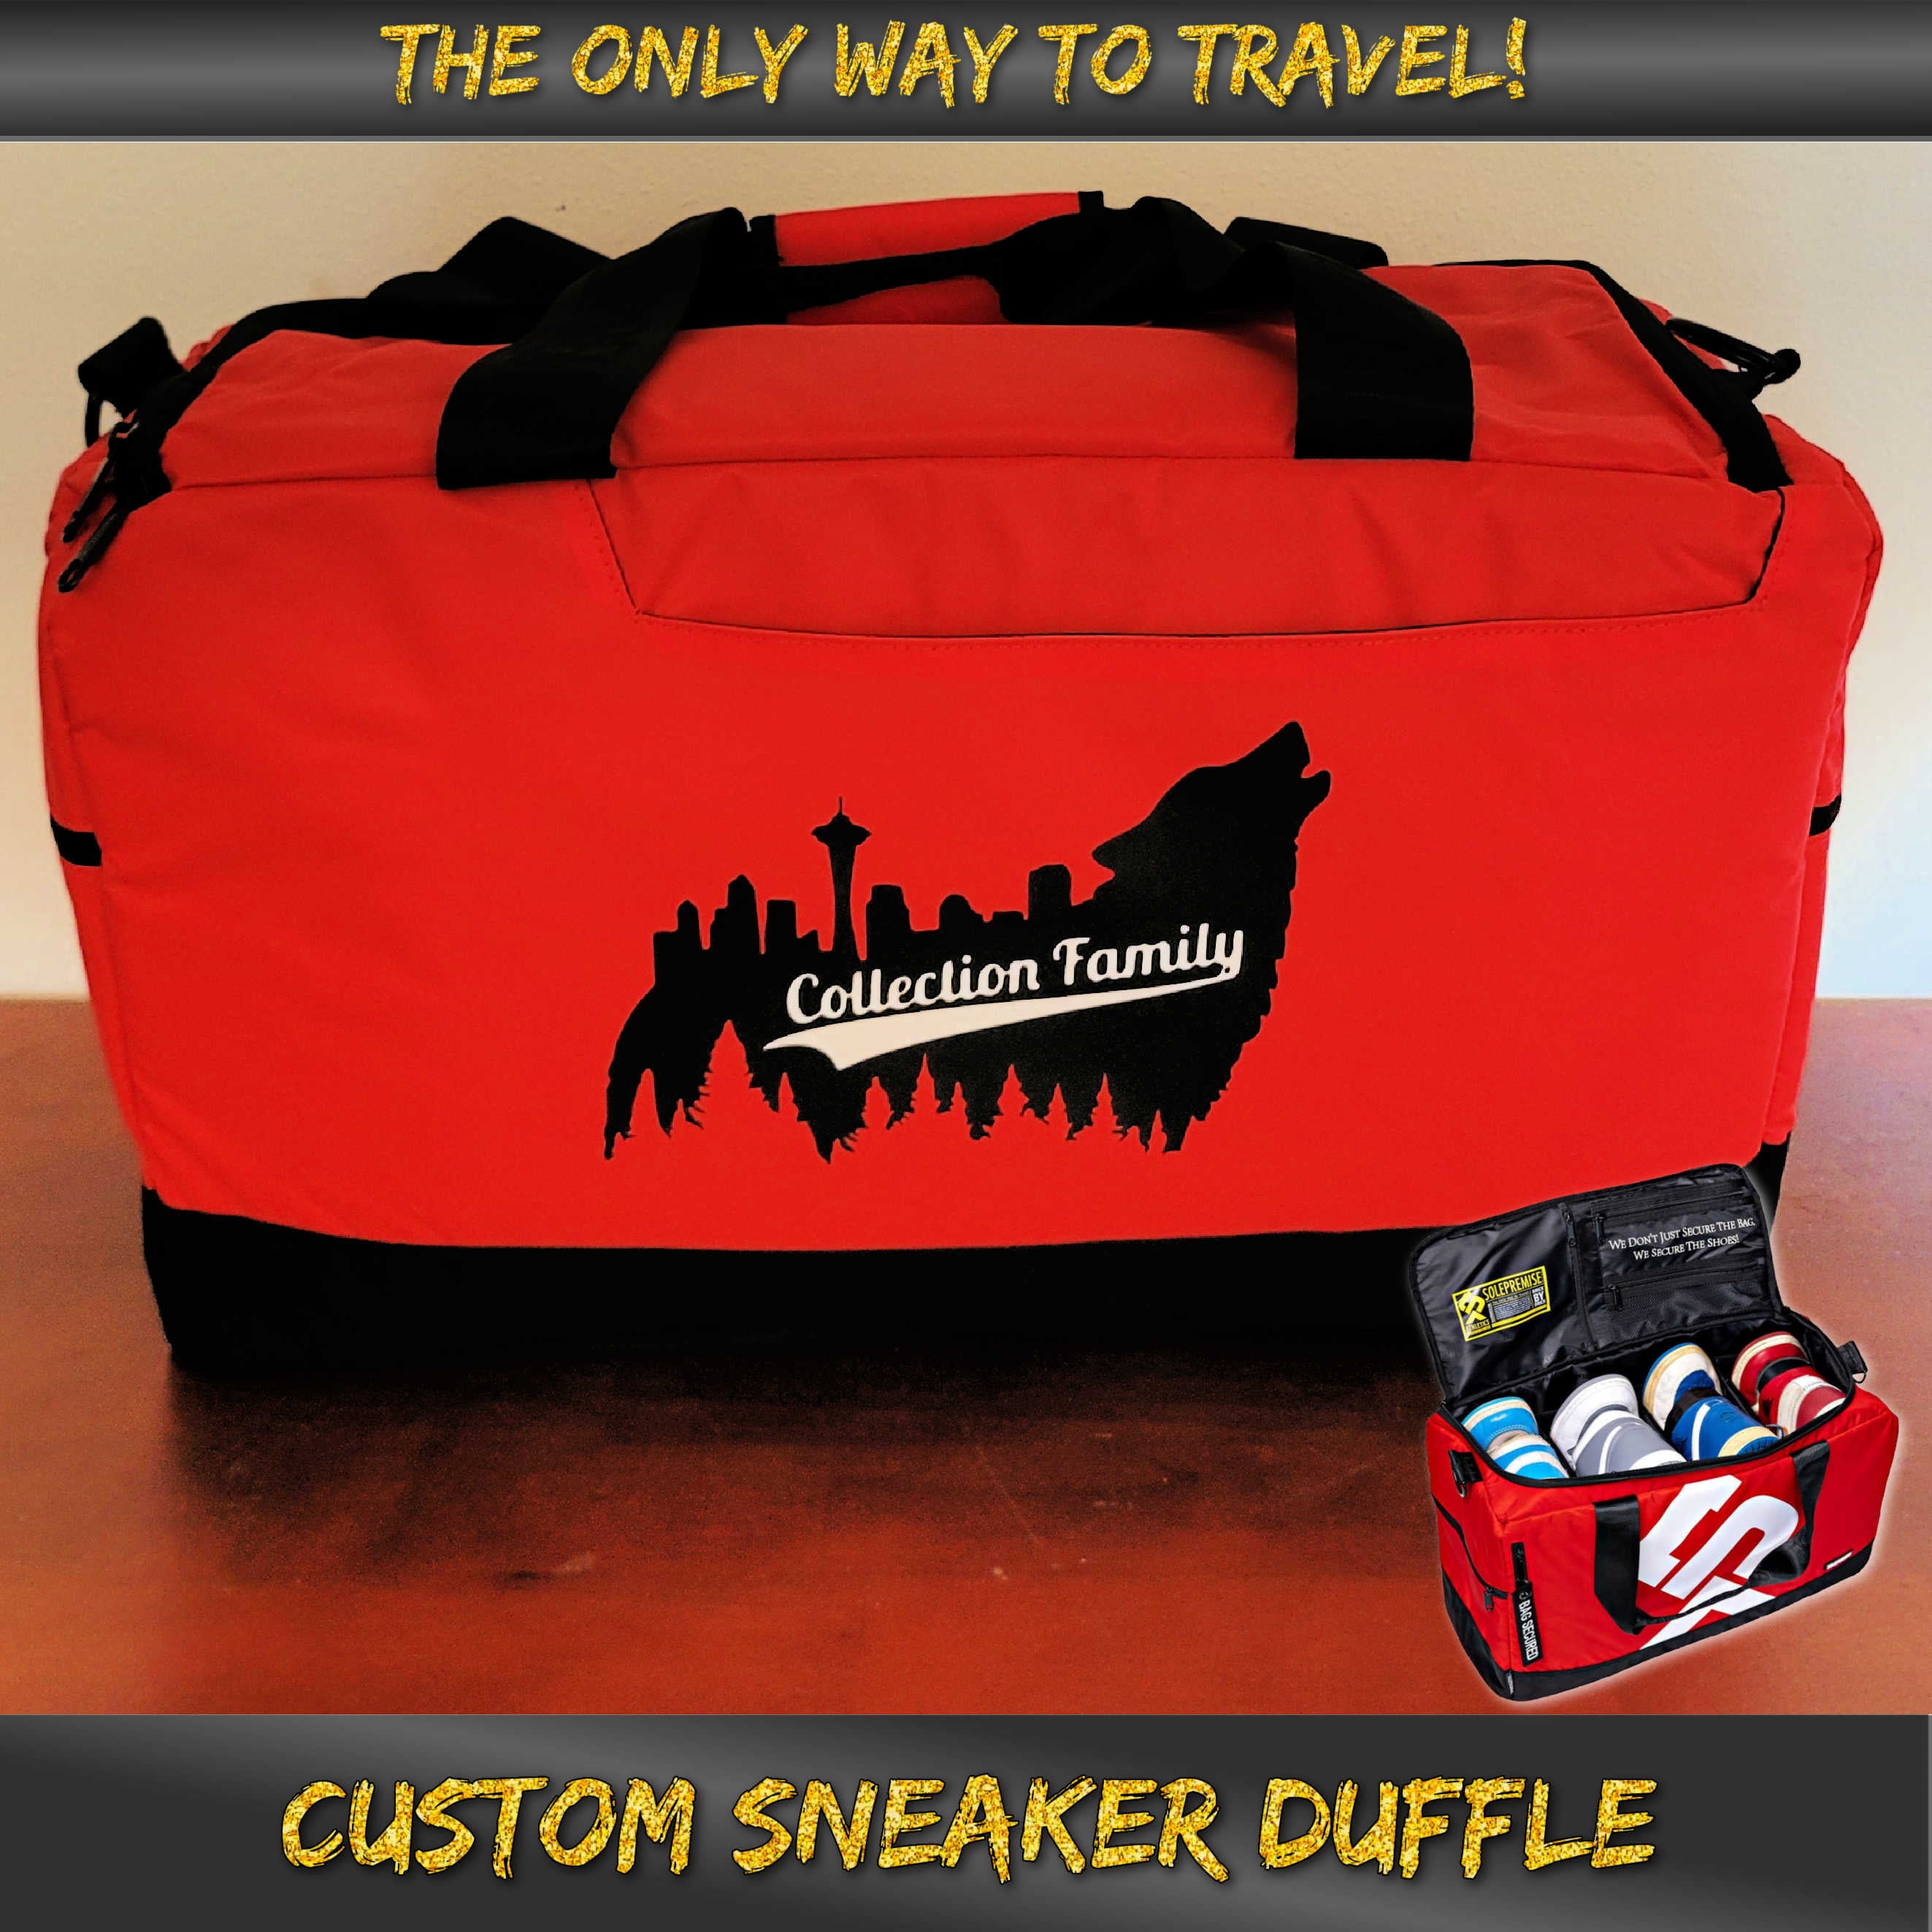 RaffyCollects "Collection Family" Custom Sneaker Duffle